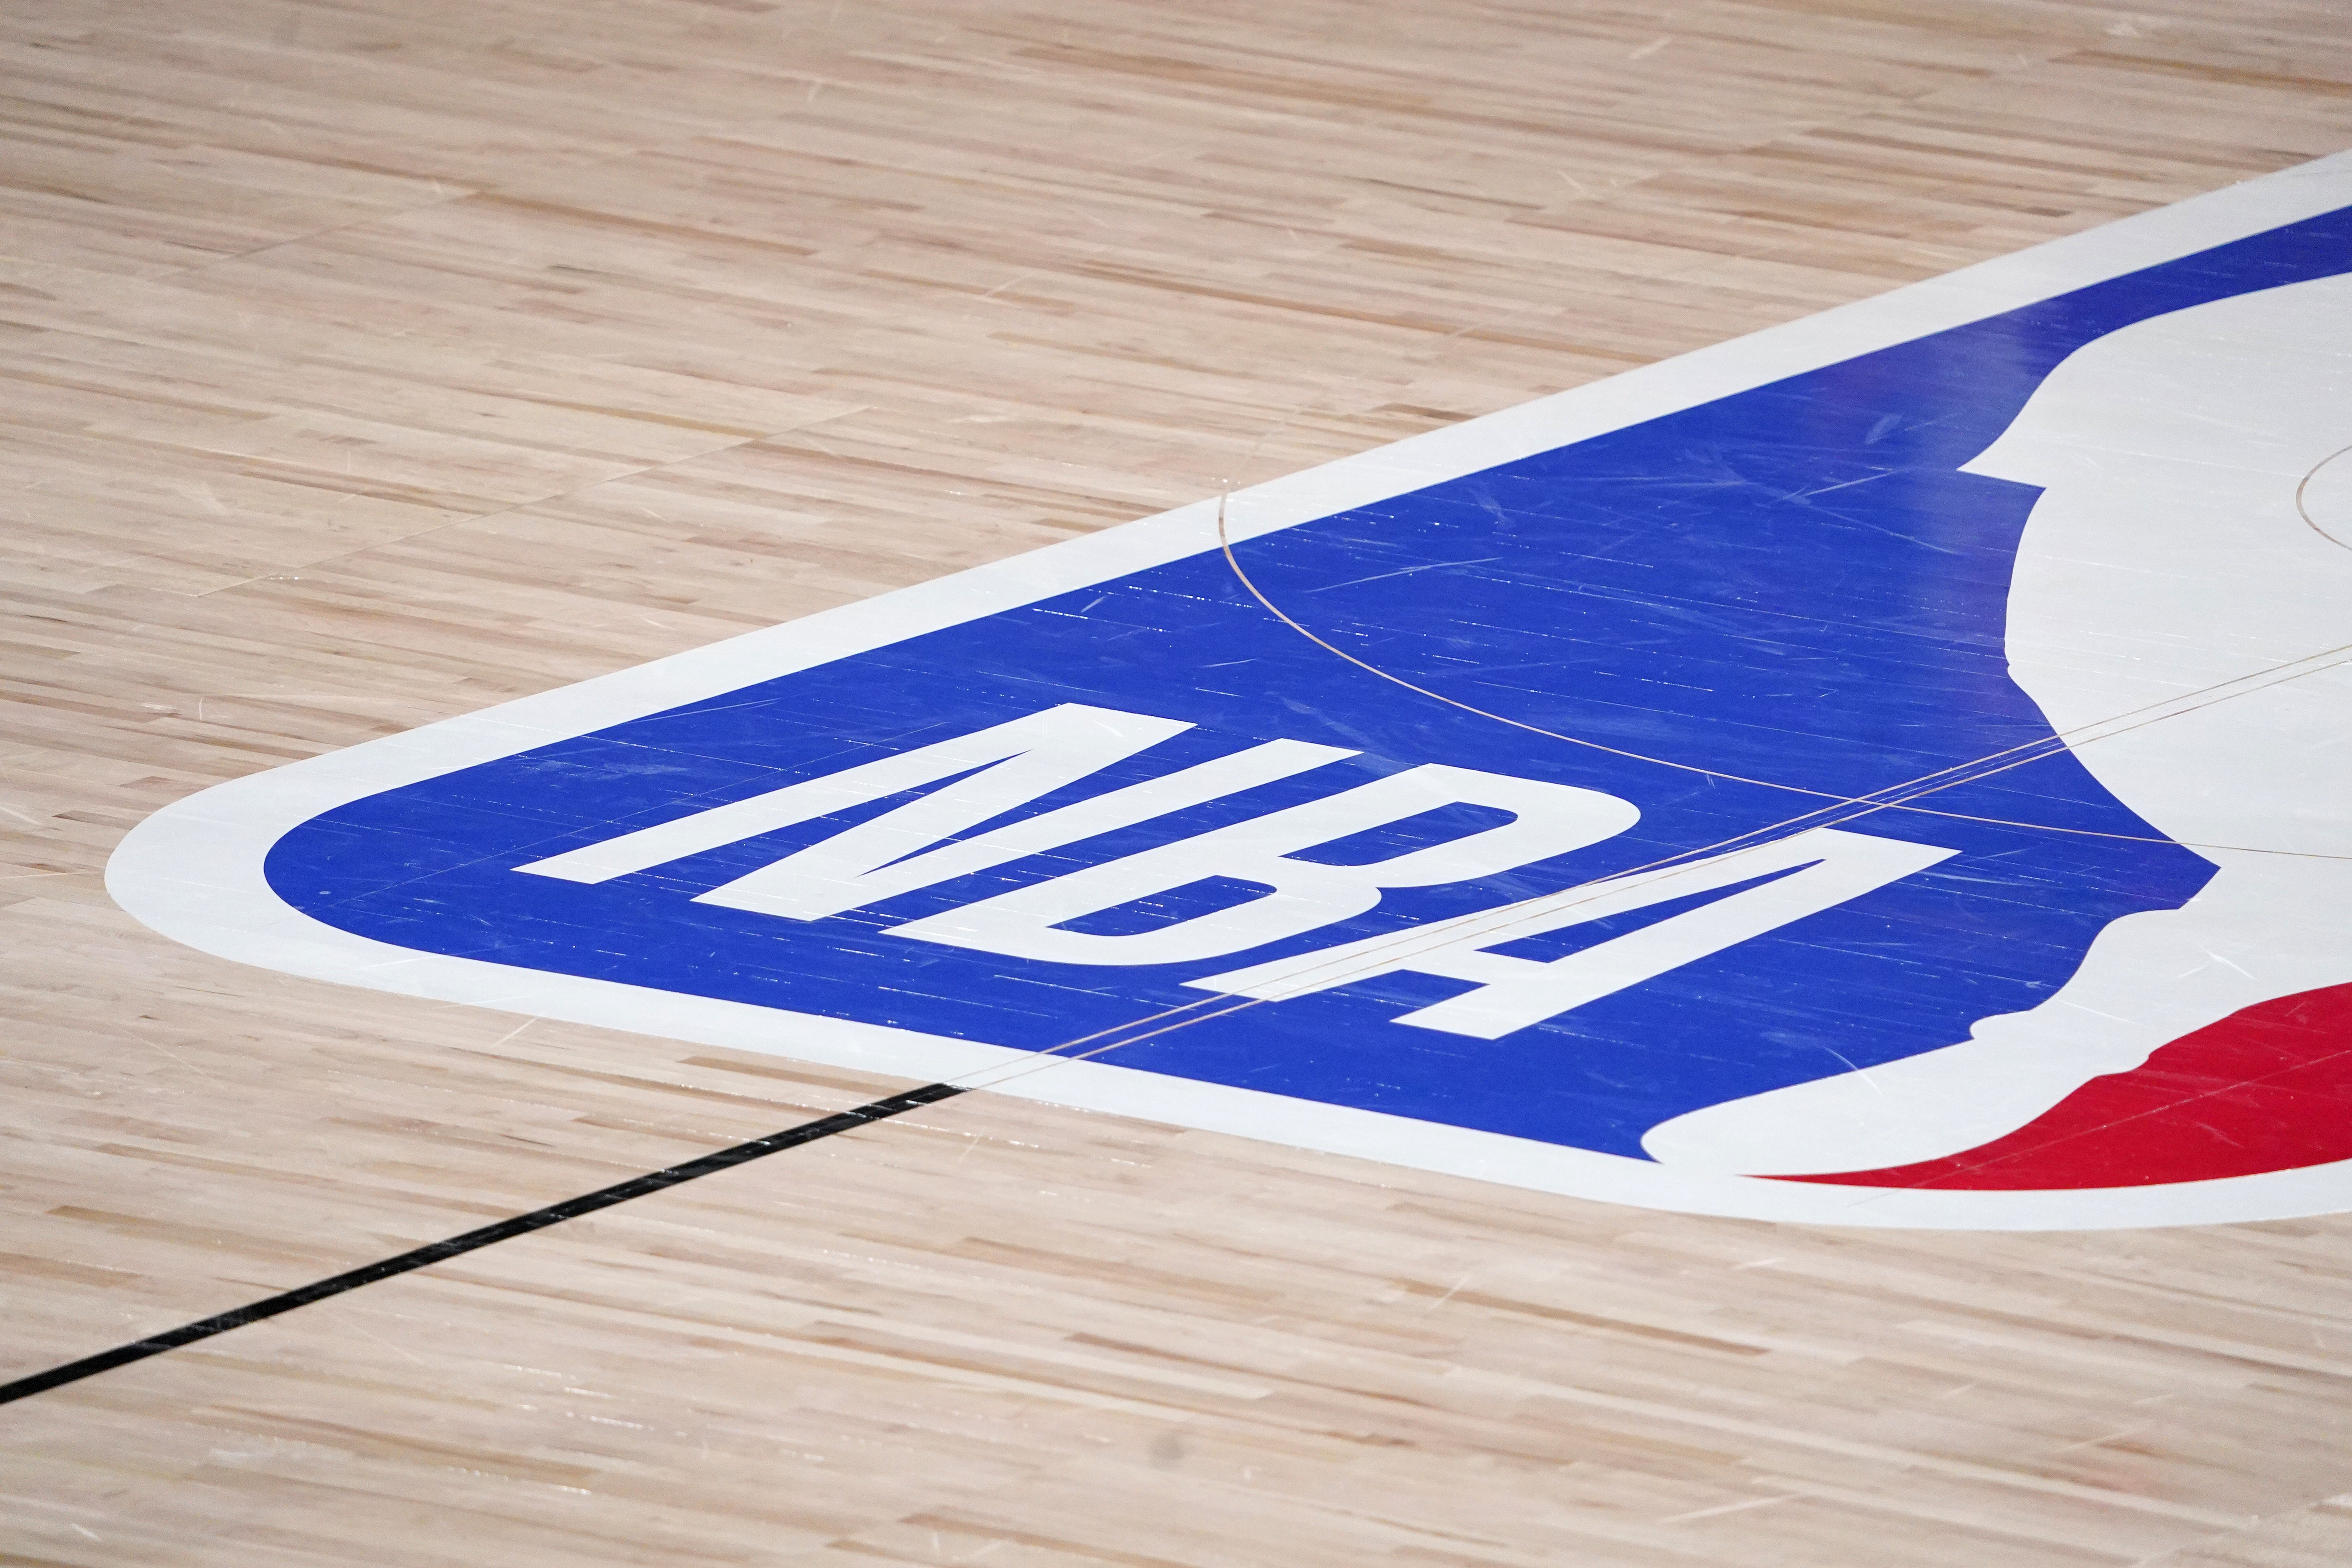 Nba 2022 Schedule Nba Schedule 2022: Regular Season, Playoffs, Finals And Key Dates  Reportedly Revealed | Bleacher Report | Latest News, Videos And Highlights